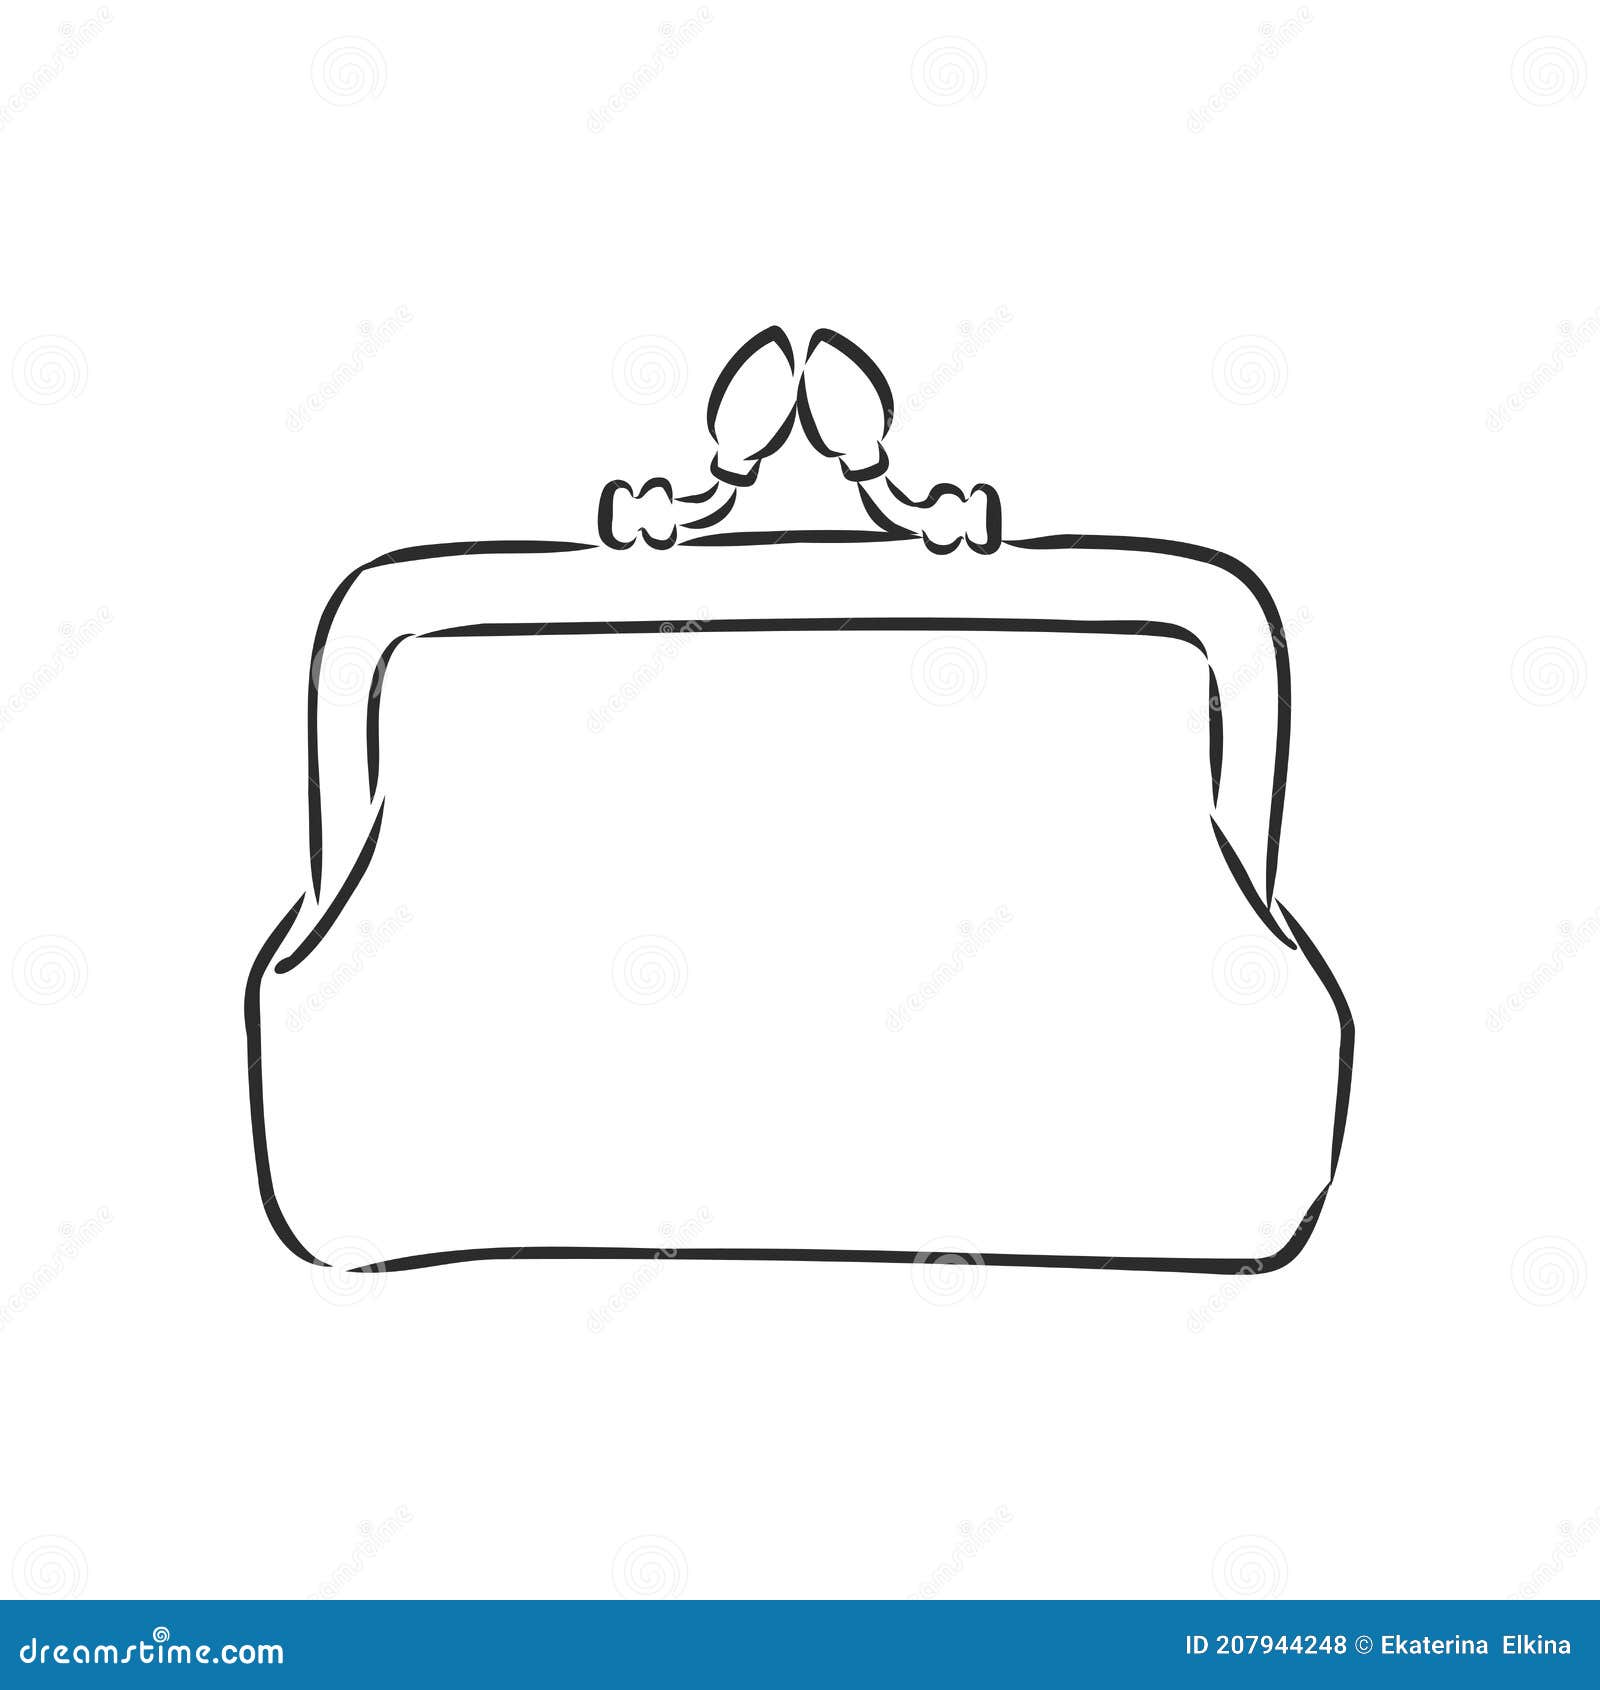 Draw a Great Cute Purse Using Simple Shapes | Design Chair-hangkhonggiare.com.vn